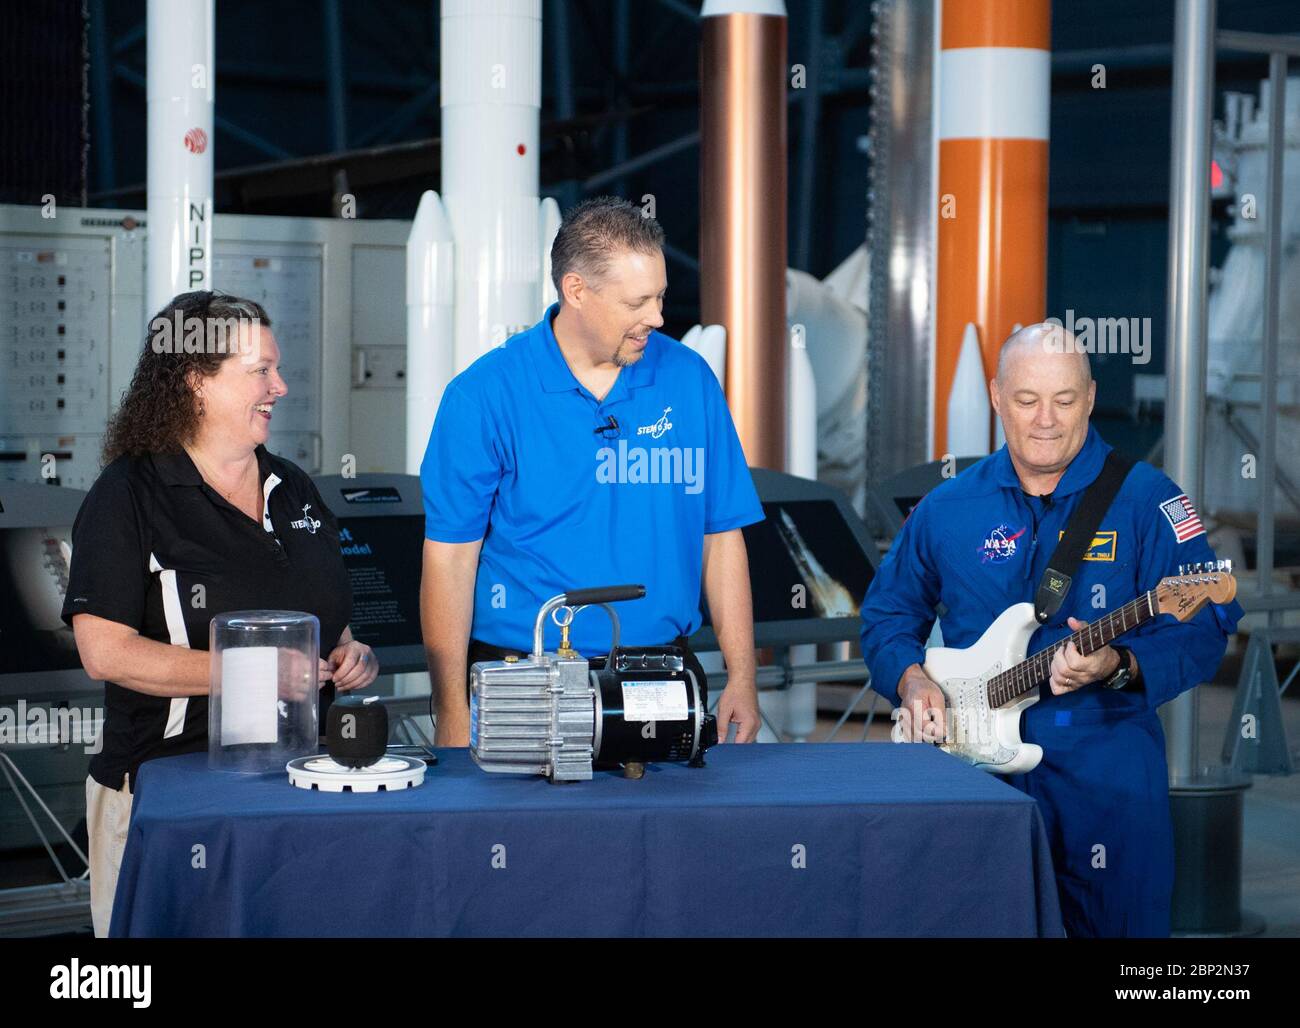 Astronaut Tingle at Udvar-Hazy Center  NASA astronaut Scott Tingle plays an electric guitar during a taping of STEM in 30 with Beth Wilson and Marty Kelsey, Wednesday, Sept. 12, 2018 at the Smithsonian National Air and Space Museum's Steven F. Udvar-Hazy Center in Chantilly, Va. Tingle spent 168 days onboard the International Space Station as part of Expeditions 54 and 55. Stock Photo